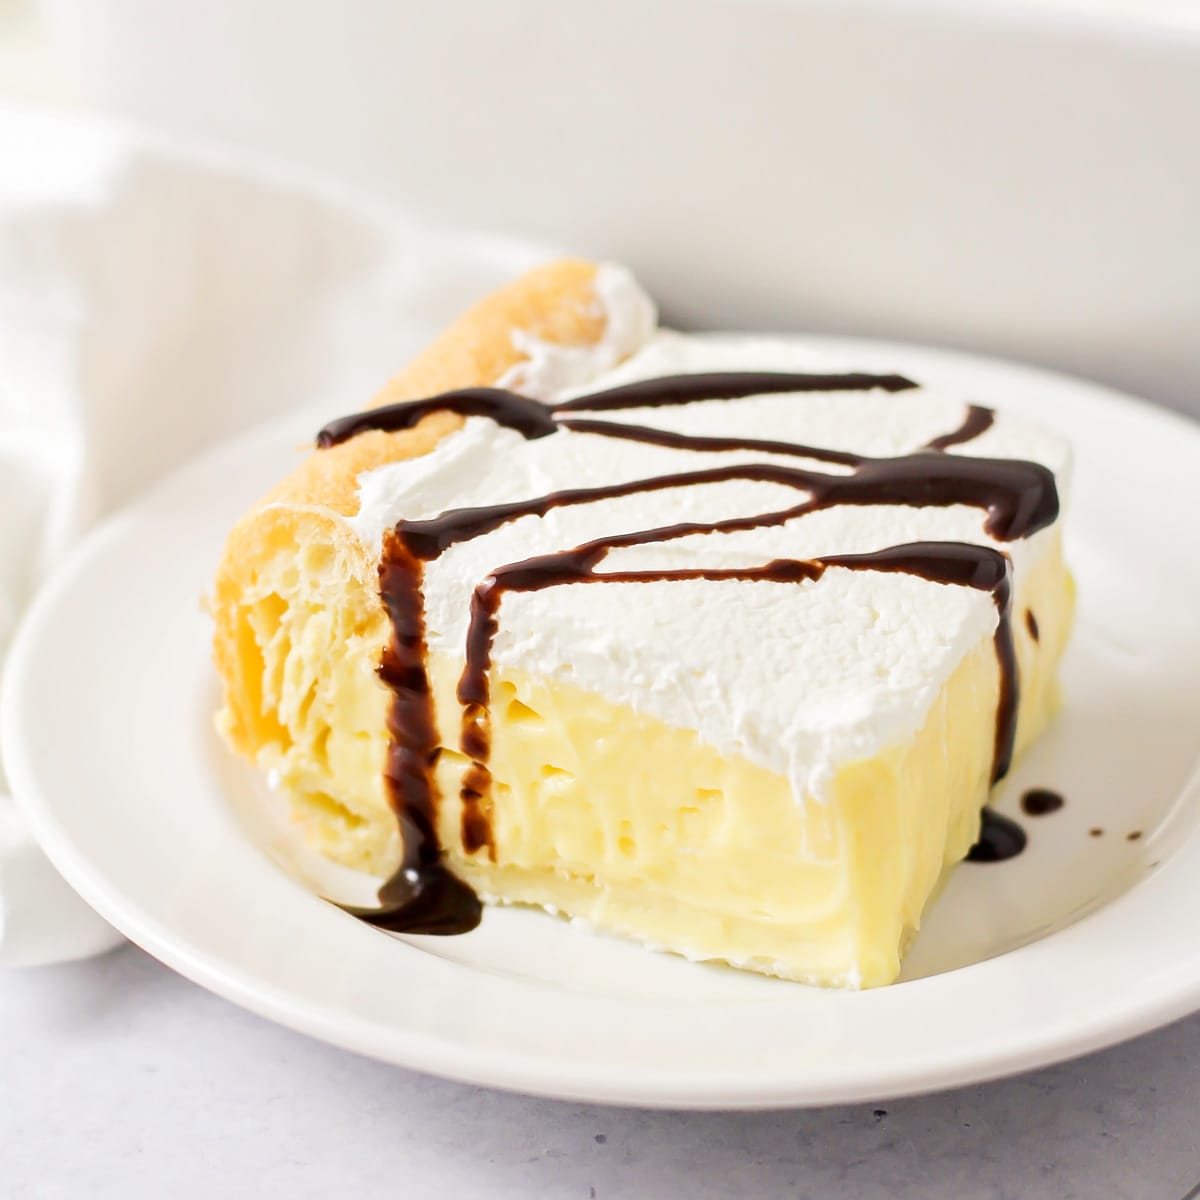 A slice of cream puff cake drizzled in chocolate sauce.